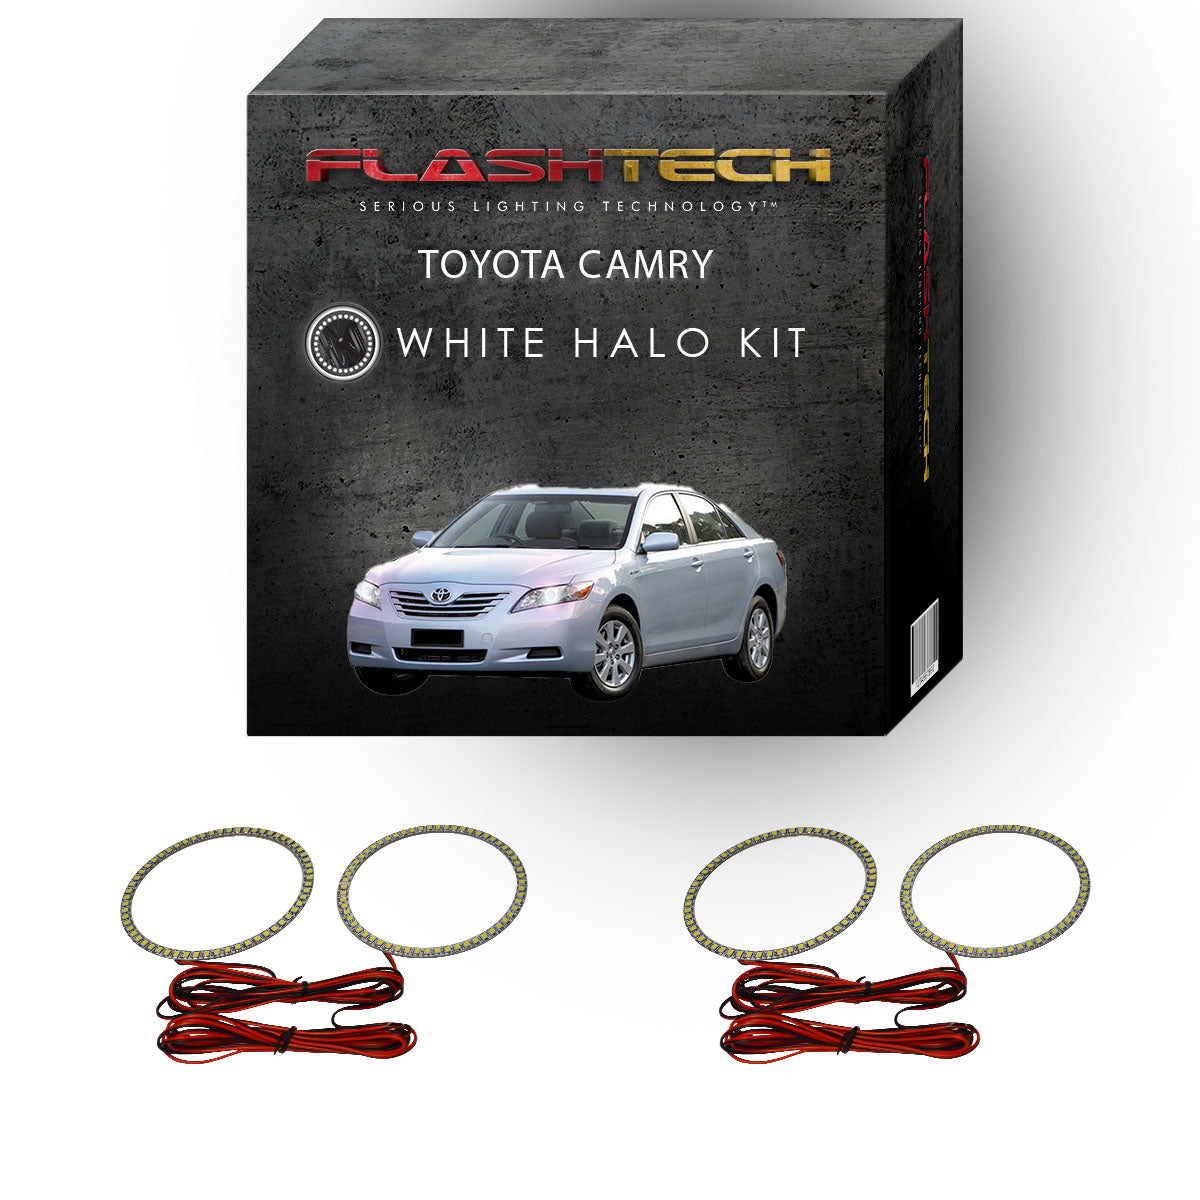 Toyota-Camry-2007, 2008, 2009-LED-Halo-Headlights-White-RF Remote White-TO-CA0709-WHRF